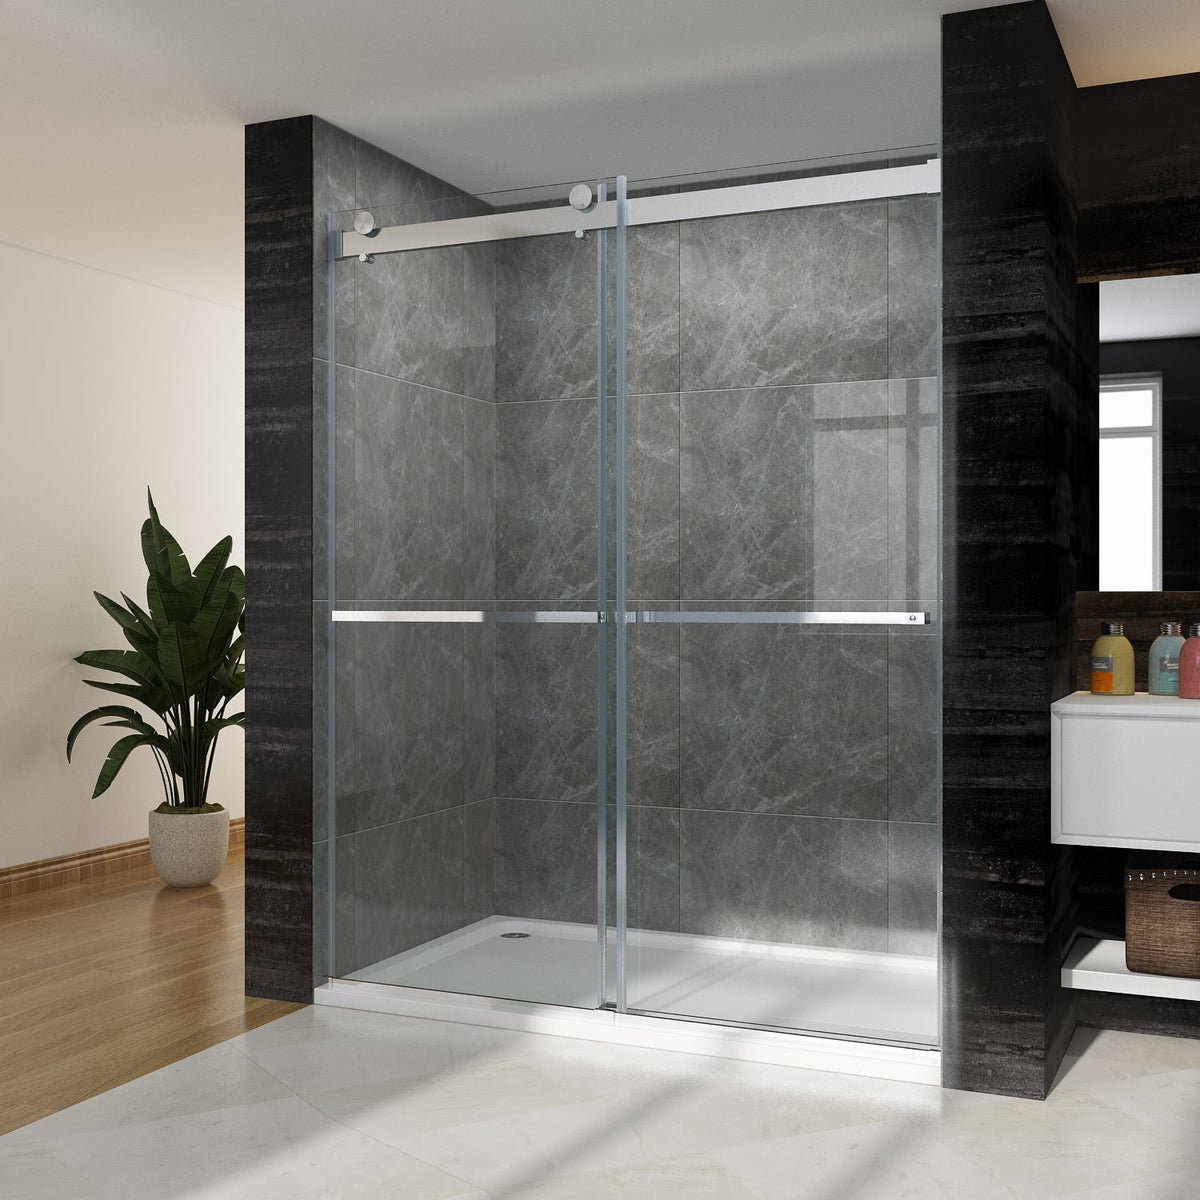 SUNNY SHOWER BP42P2 Door 60" W x 76" H Frameless Shower Enclosure 3/8"(10mm) Thick Glass Panel, 2 Ways Opening, Chrome Finish - SUNNY SHOWER